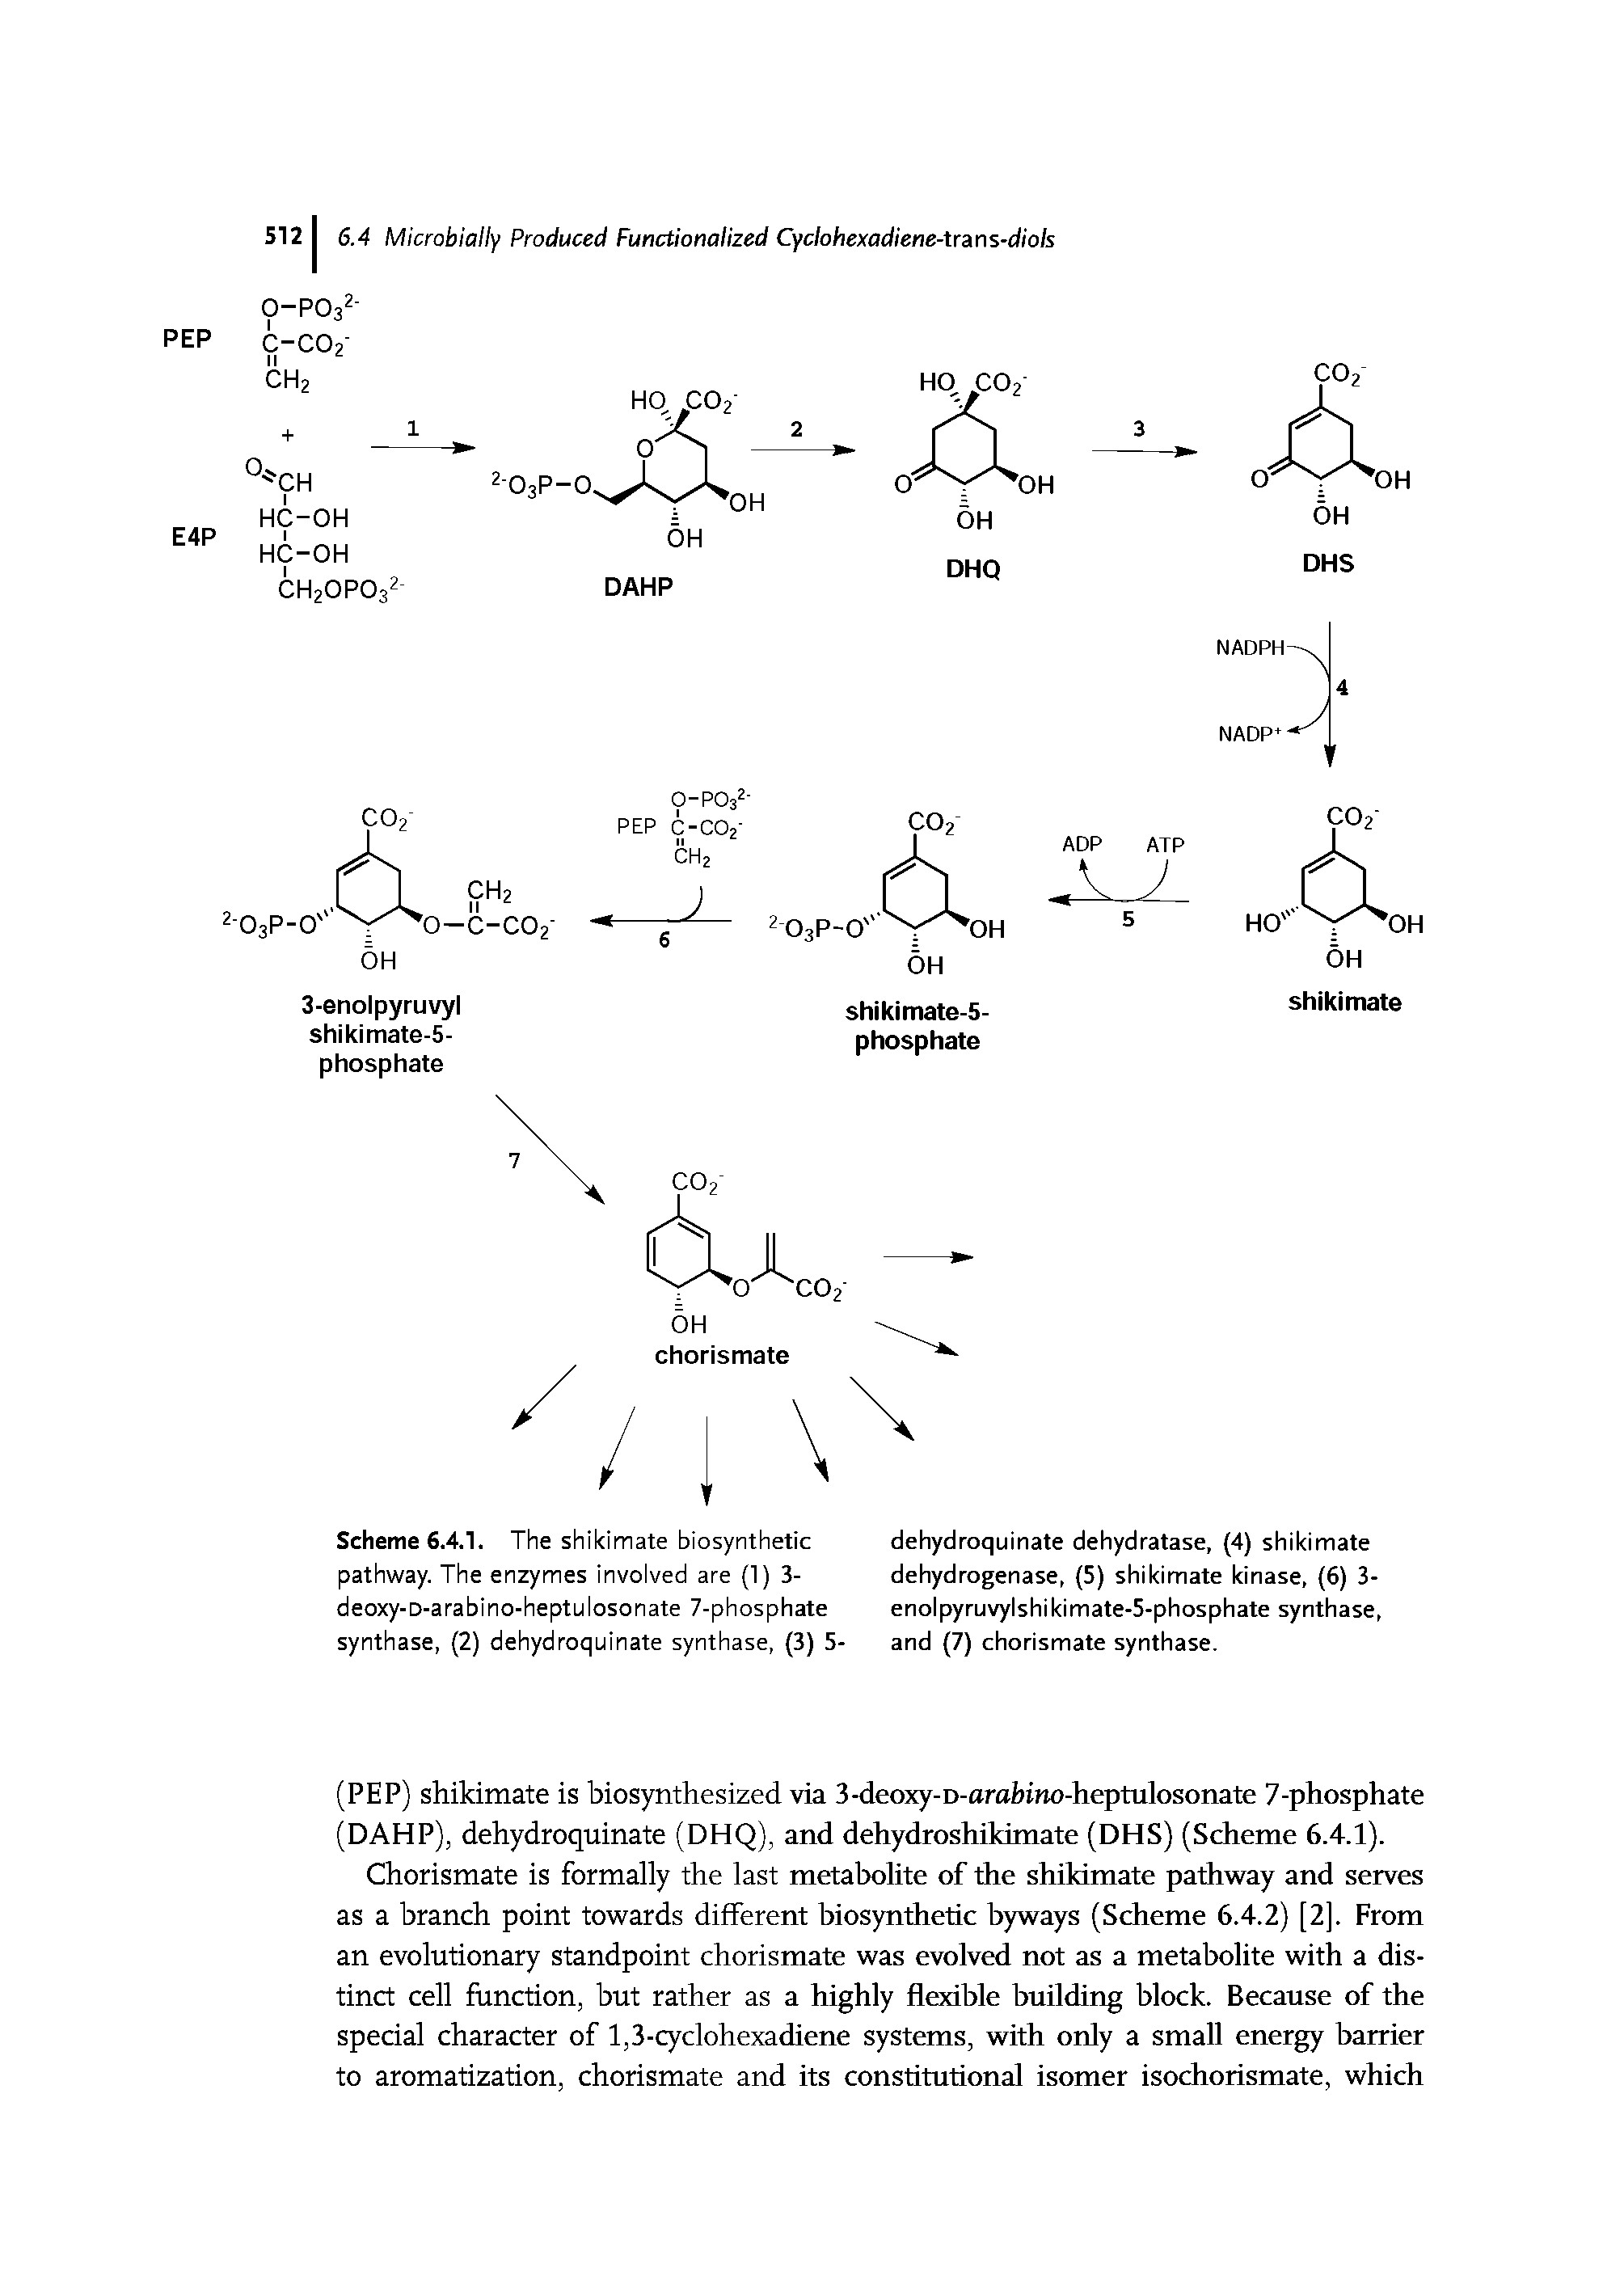 Scheme 6.4.1. The shikimate biosynthetic pathway. The enzymes involved are (1) 3-deoxy-D-arabino-heptulosonate 7-phosphate synthase, (2) dehydroquinate synthase, (3) 5-...